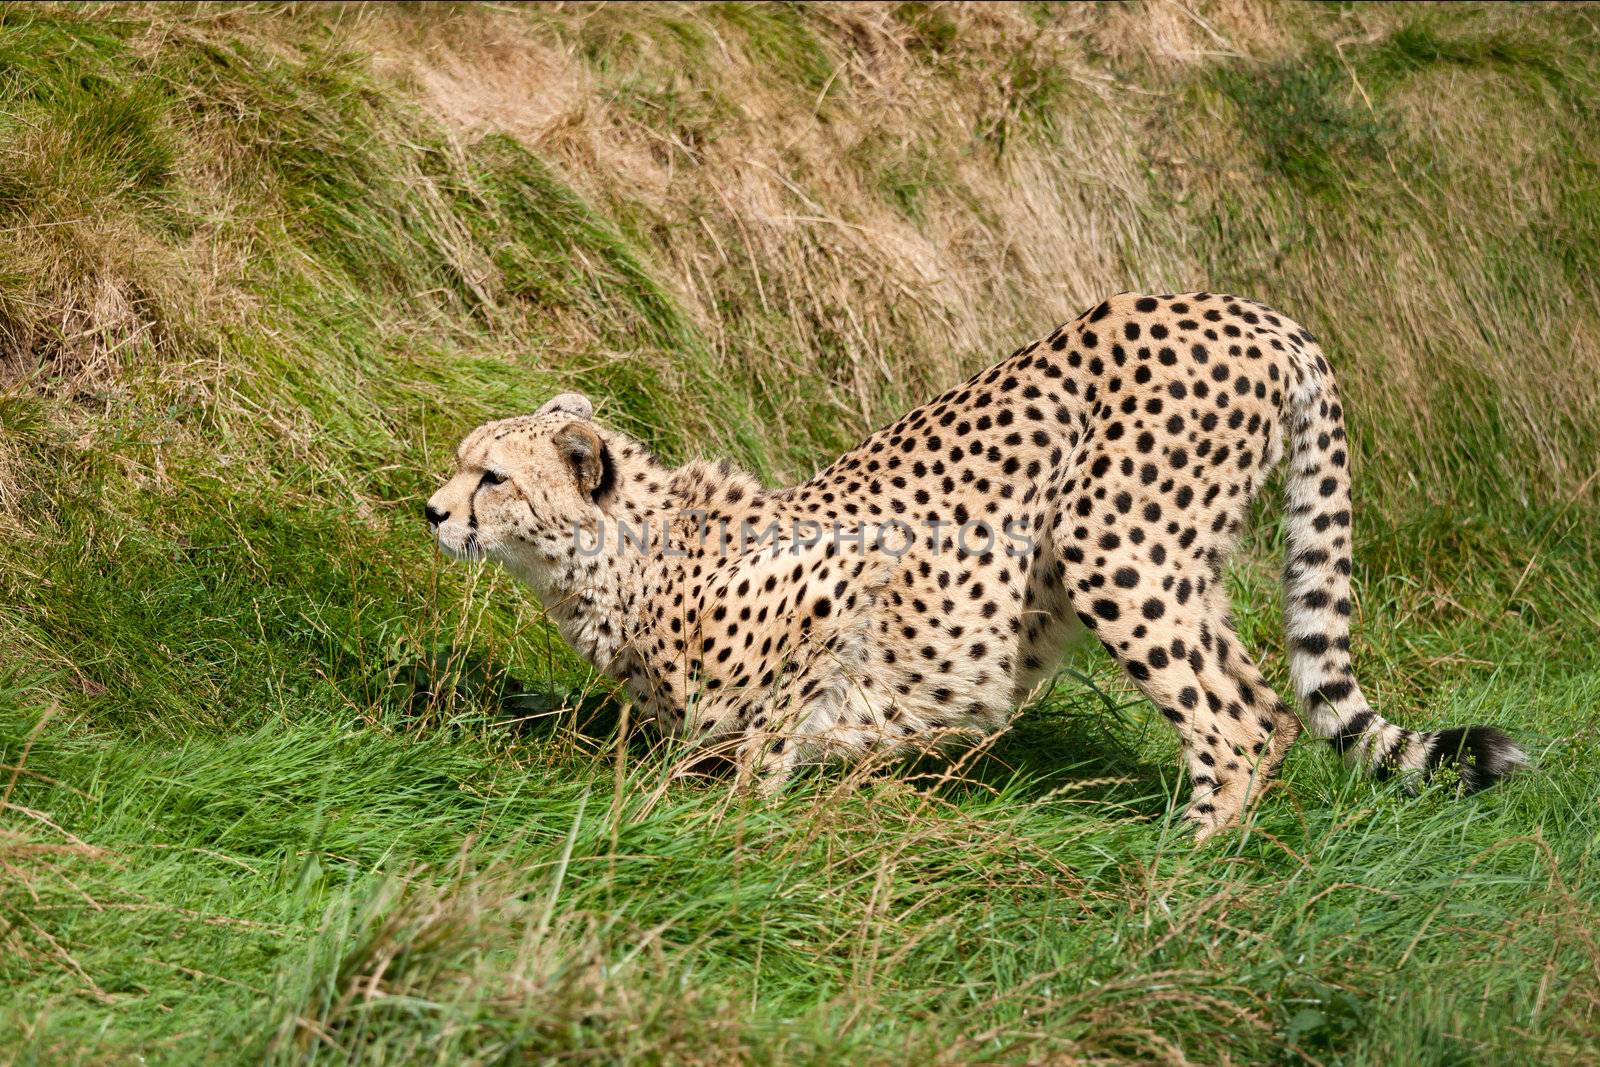 Cheetah Crouching in the Grass Ready to Pounce by scheriton